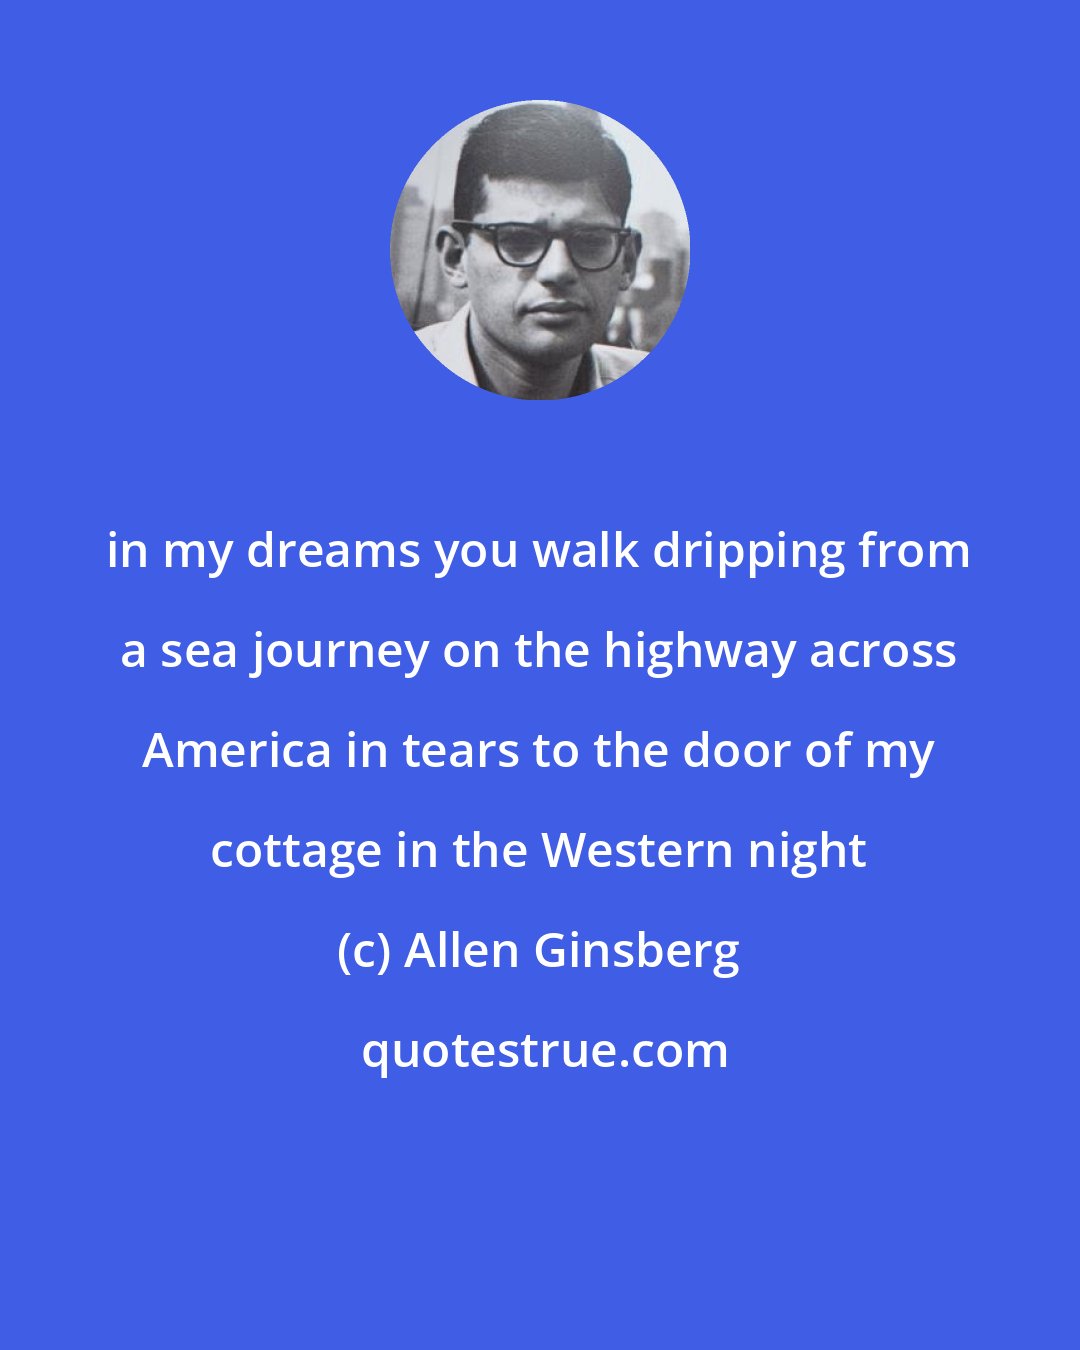 Allen Ginsberg: in my dreams you walk dripping from a sea journey on the highway across America in tears to the door of my cottage in the Western night